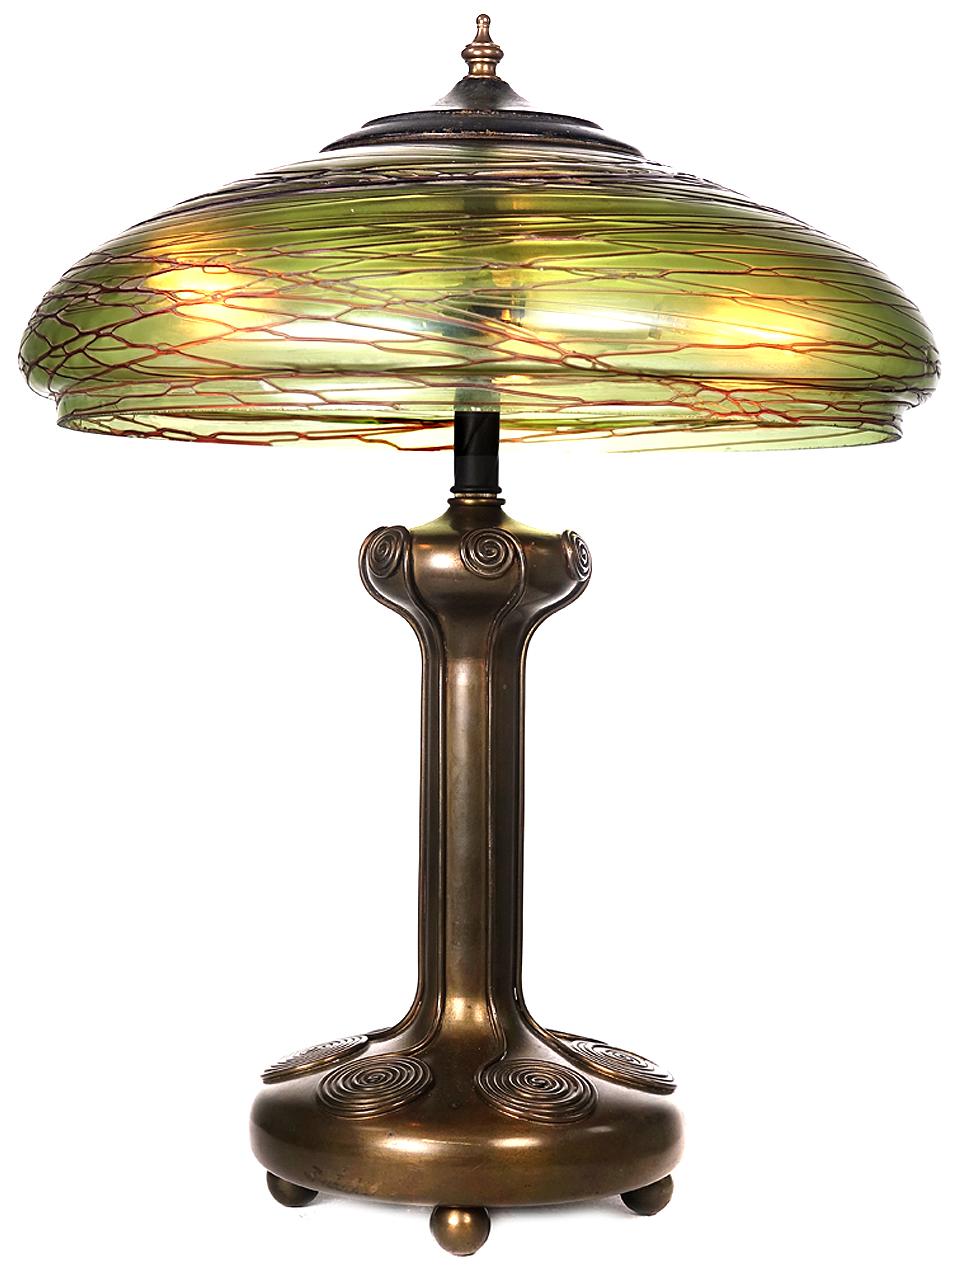 I have plenty of lamps but this is one I'd like to bring home. The hand finished details on the base and the shade have just the right look. The amber and green glass has the feel of dragonfly wings. The shape is very Arts & Crafts.